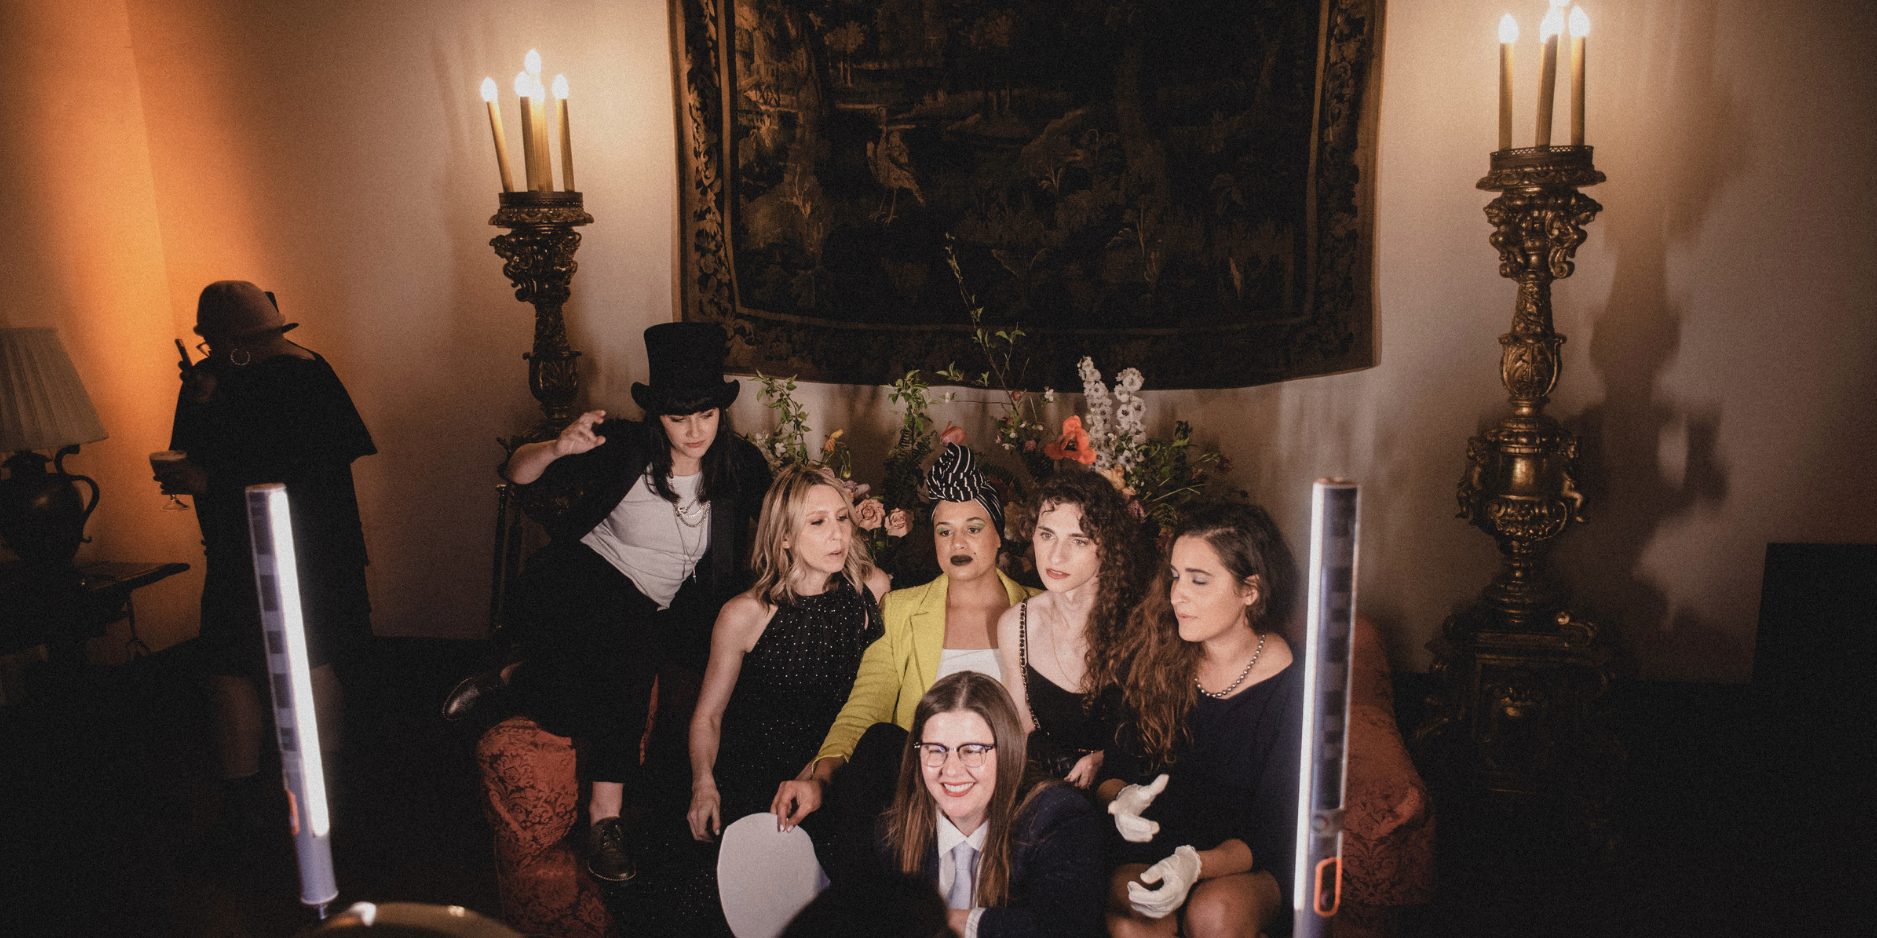 Autostraddle team and guests posing at an 1800s-style photobooth